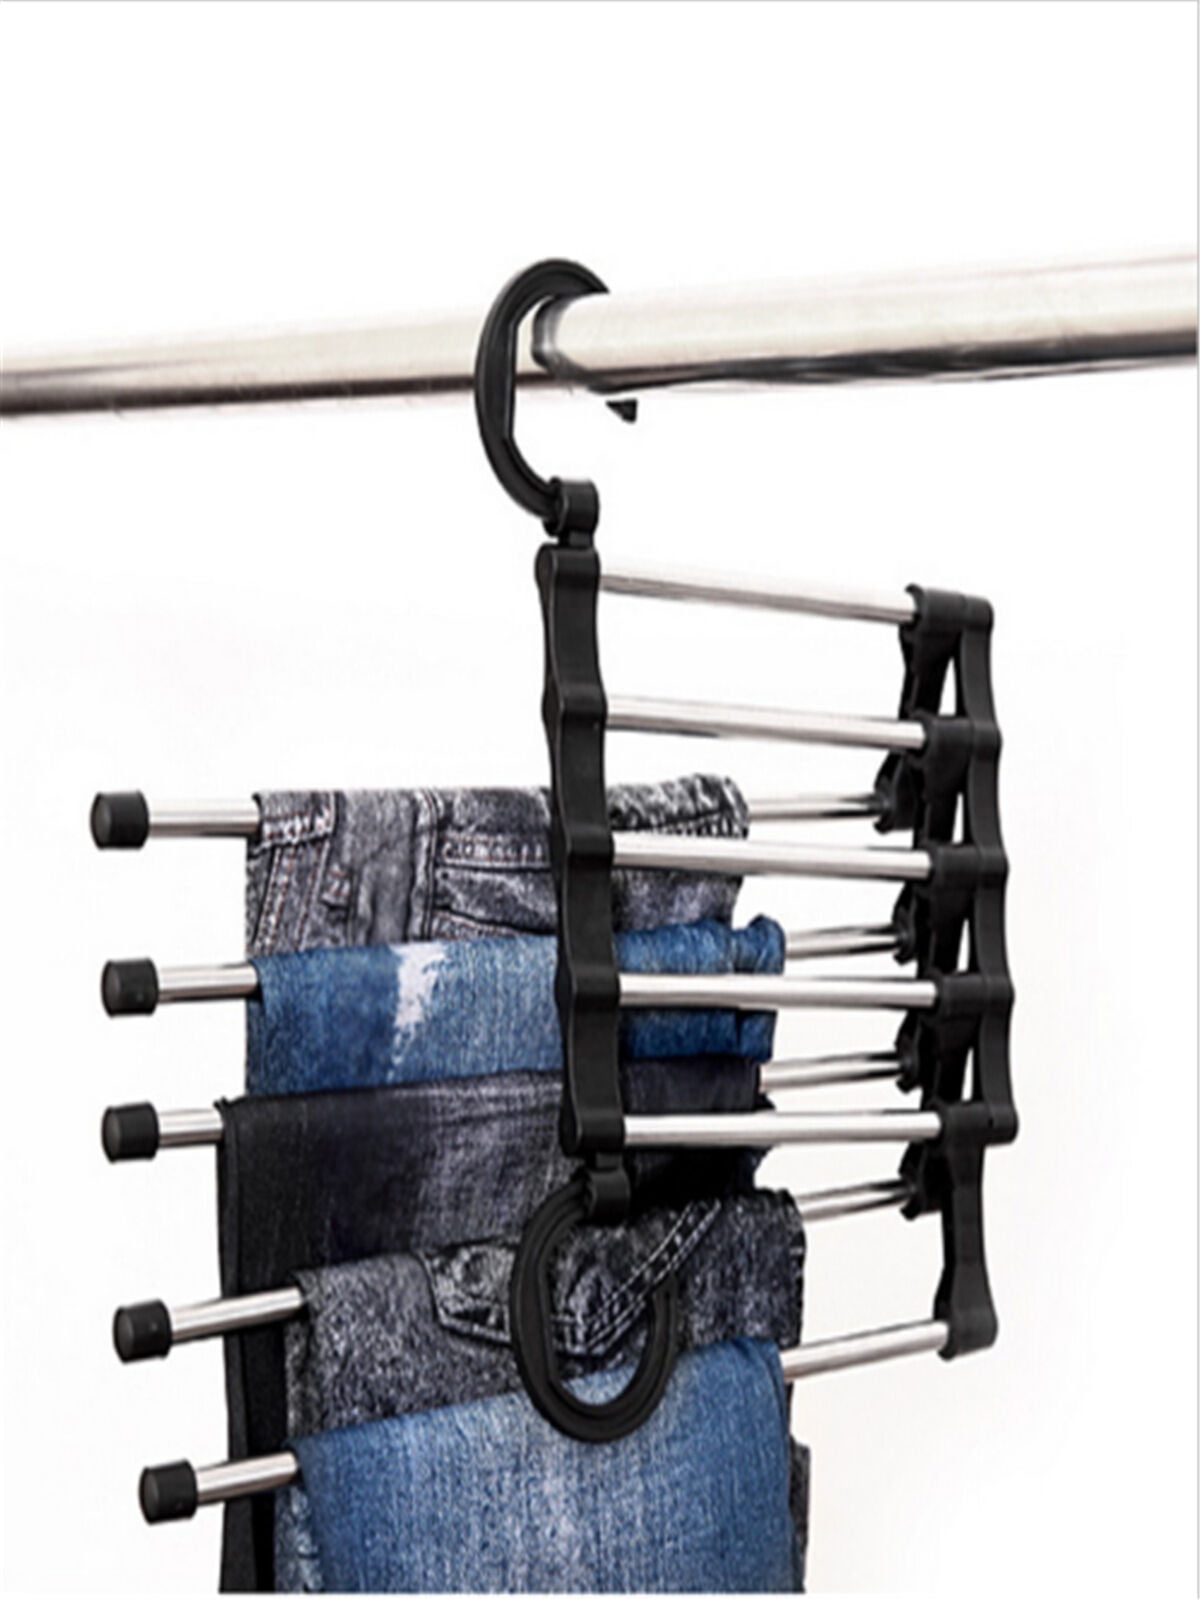 5 in 1 Multifunctional Storage Trousers Hangers Delisouls Pants Rack Shelves Non-Slip Closet Organizer for Scarfs Jeans Clothes Trousers Towels